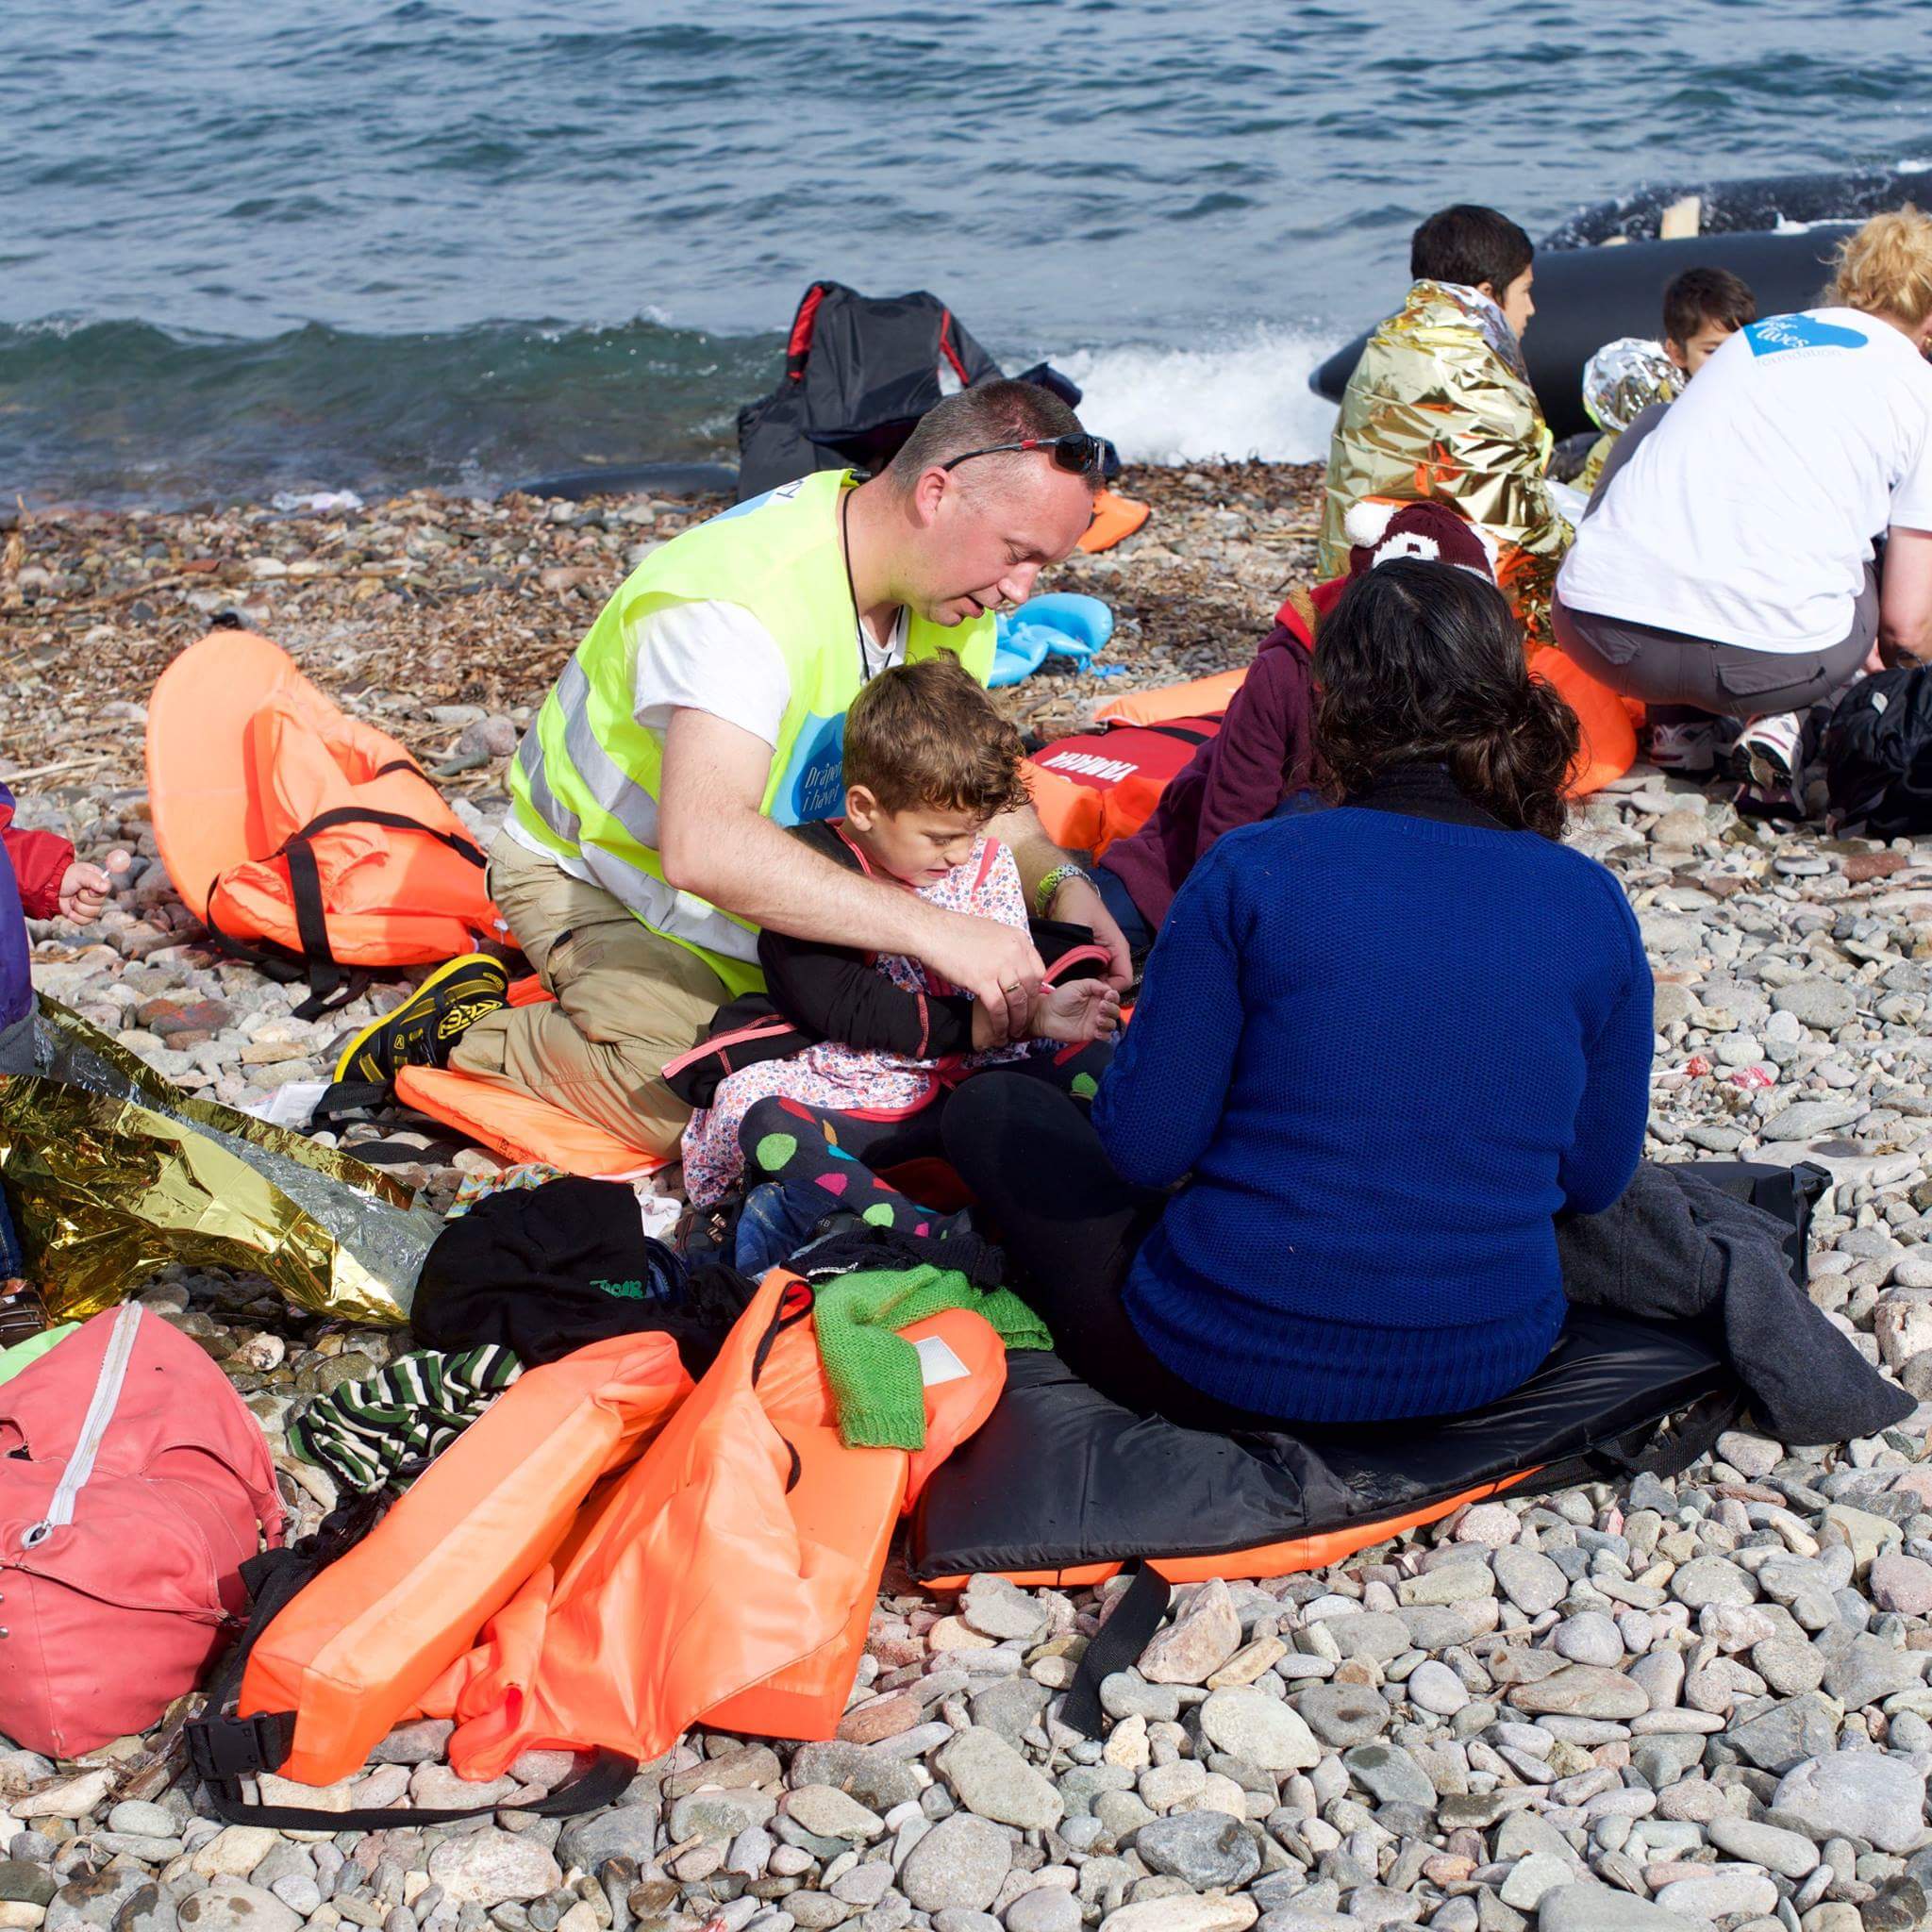 Supporters on Lesvos helping refugees